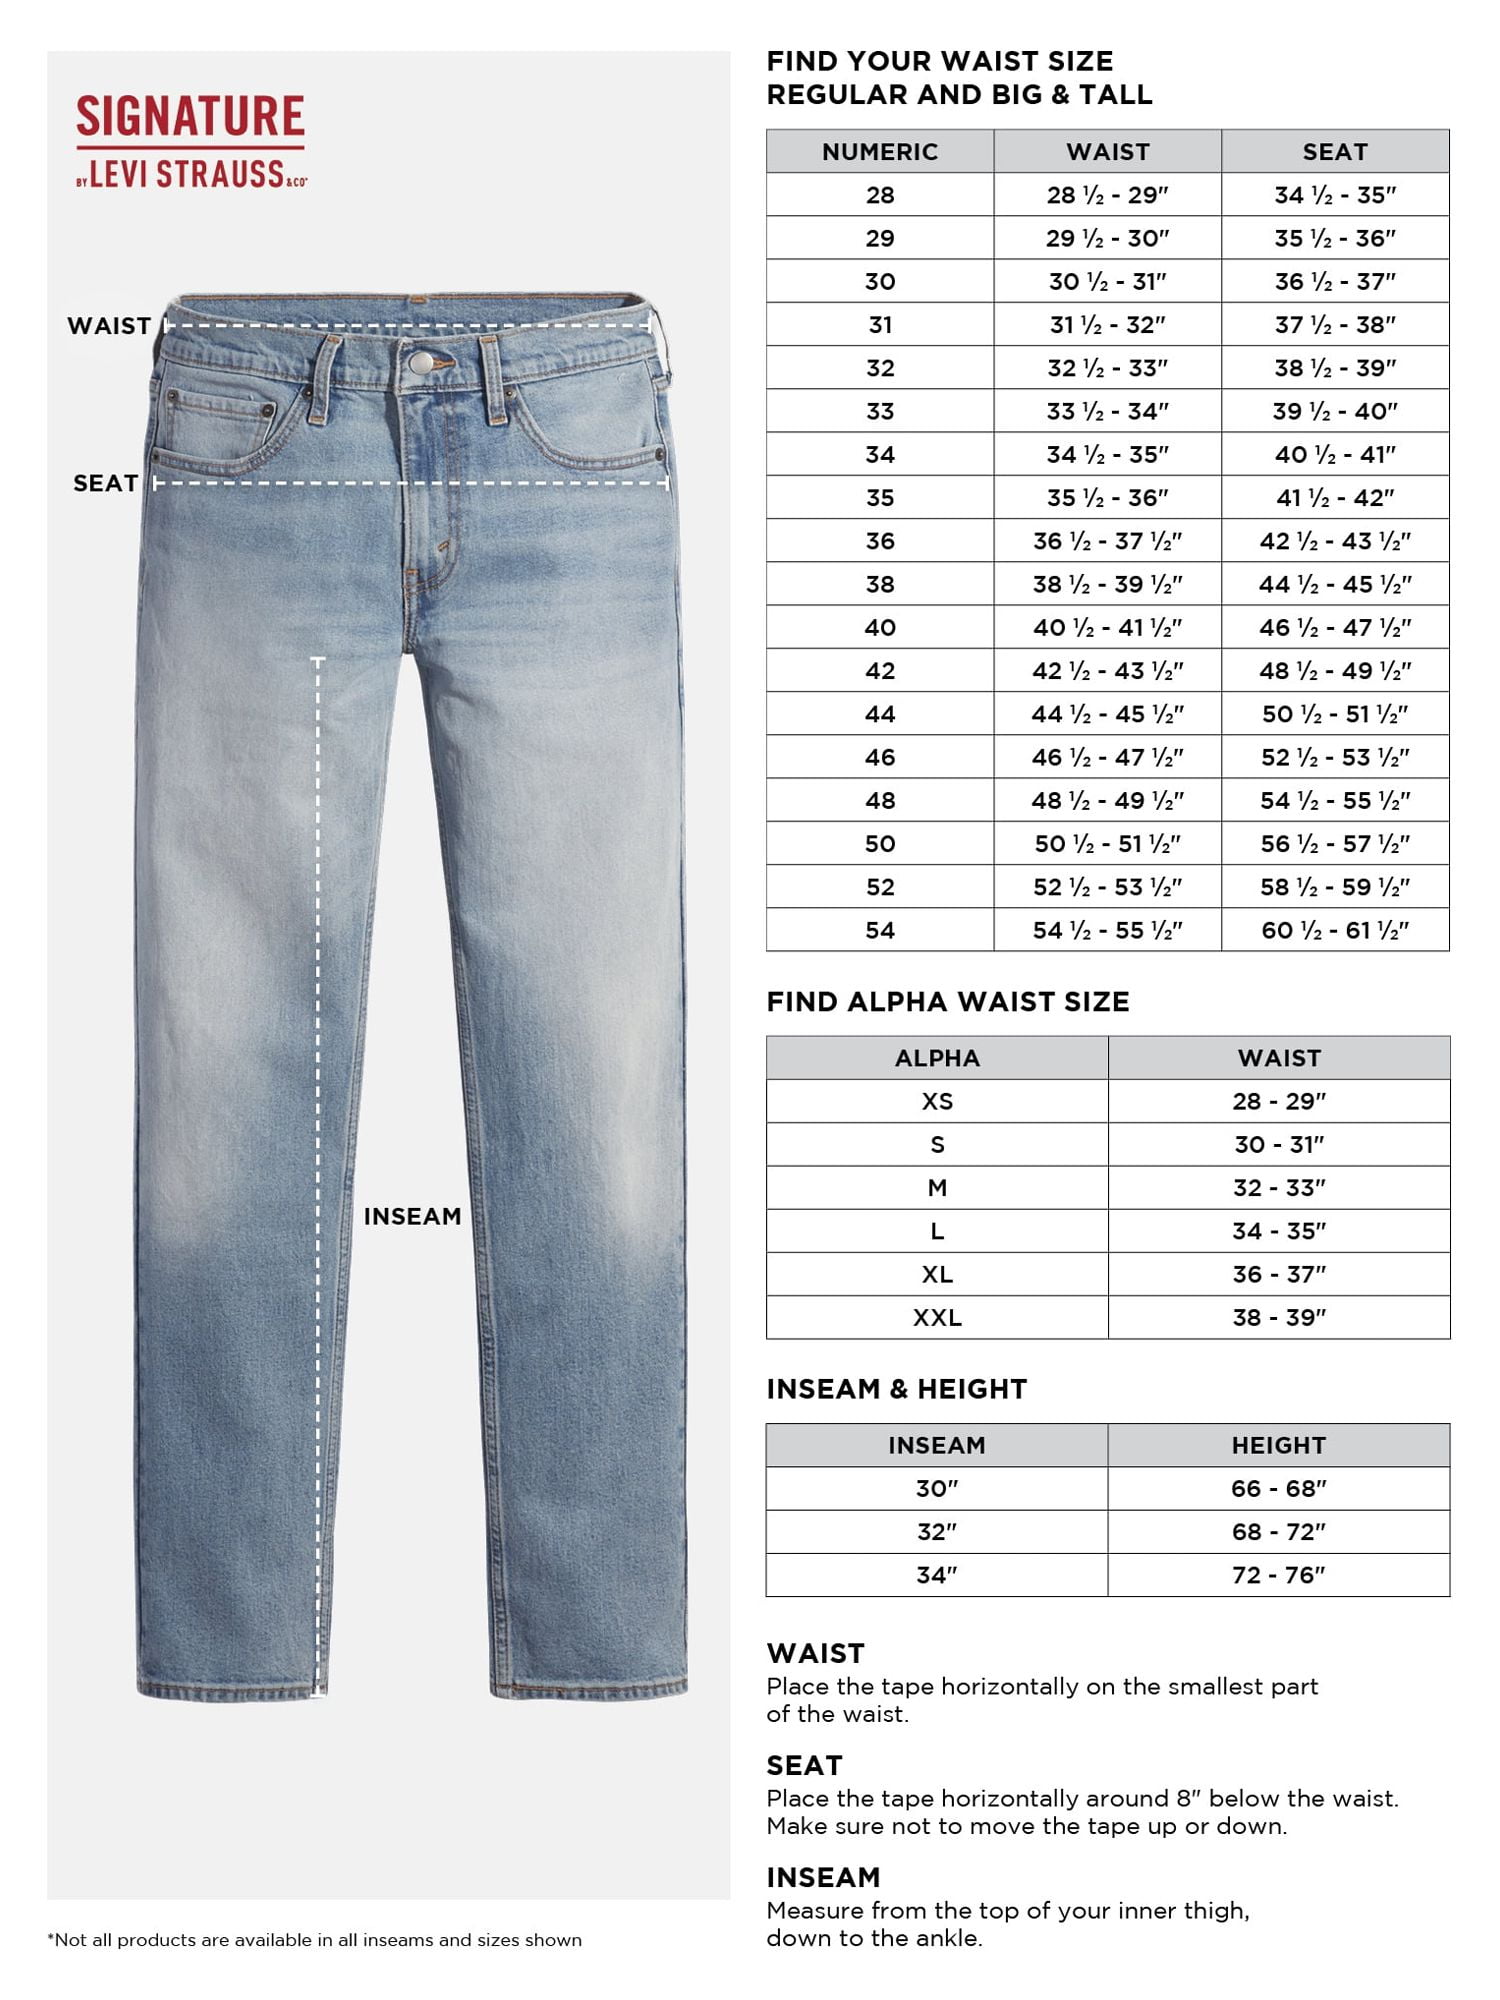 A Guide to Shrinking Levi's 501 Shrink-to-Fit Jeans | The Art of Manliness